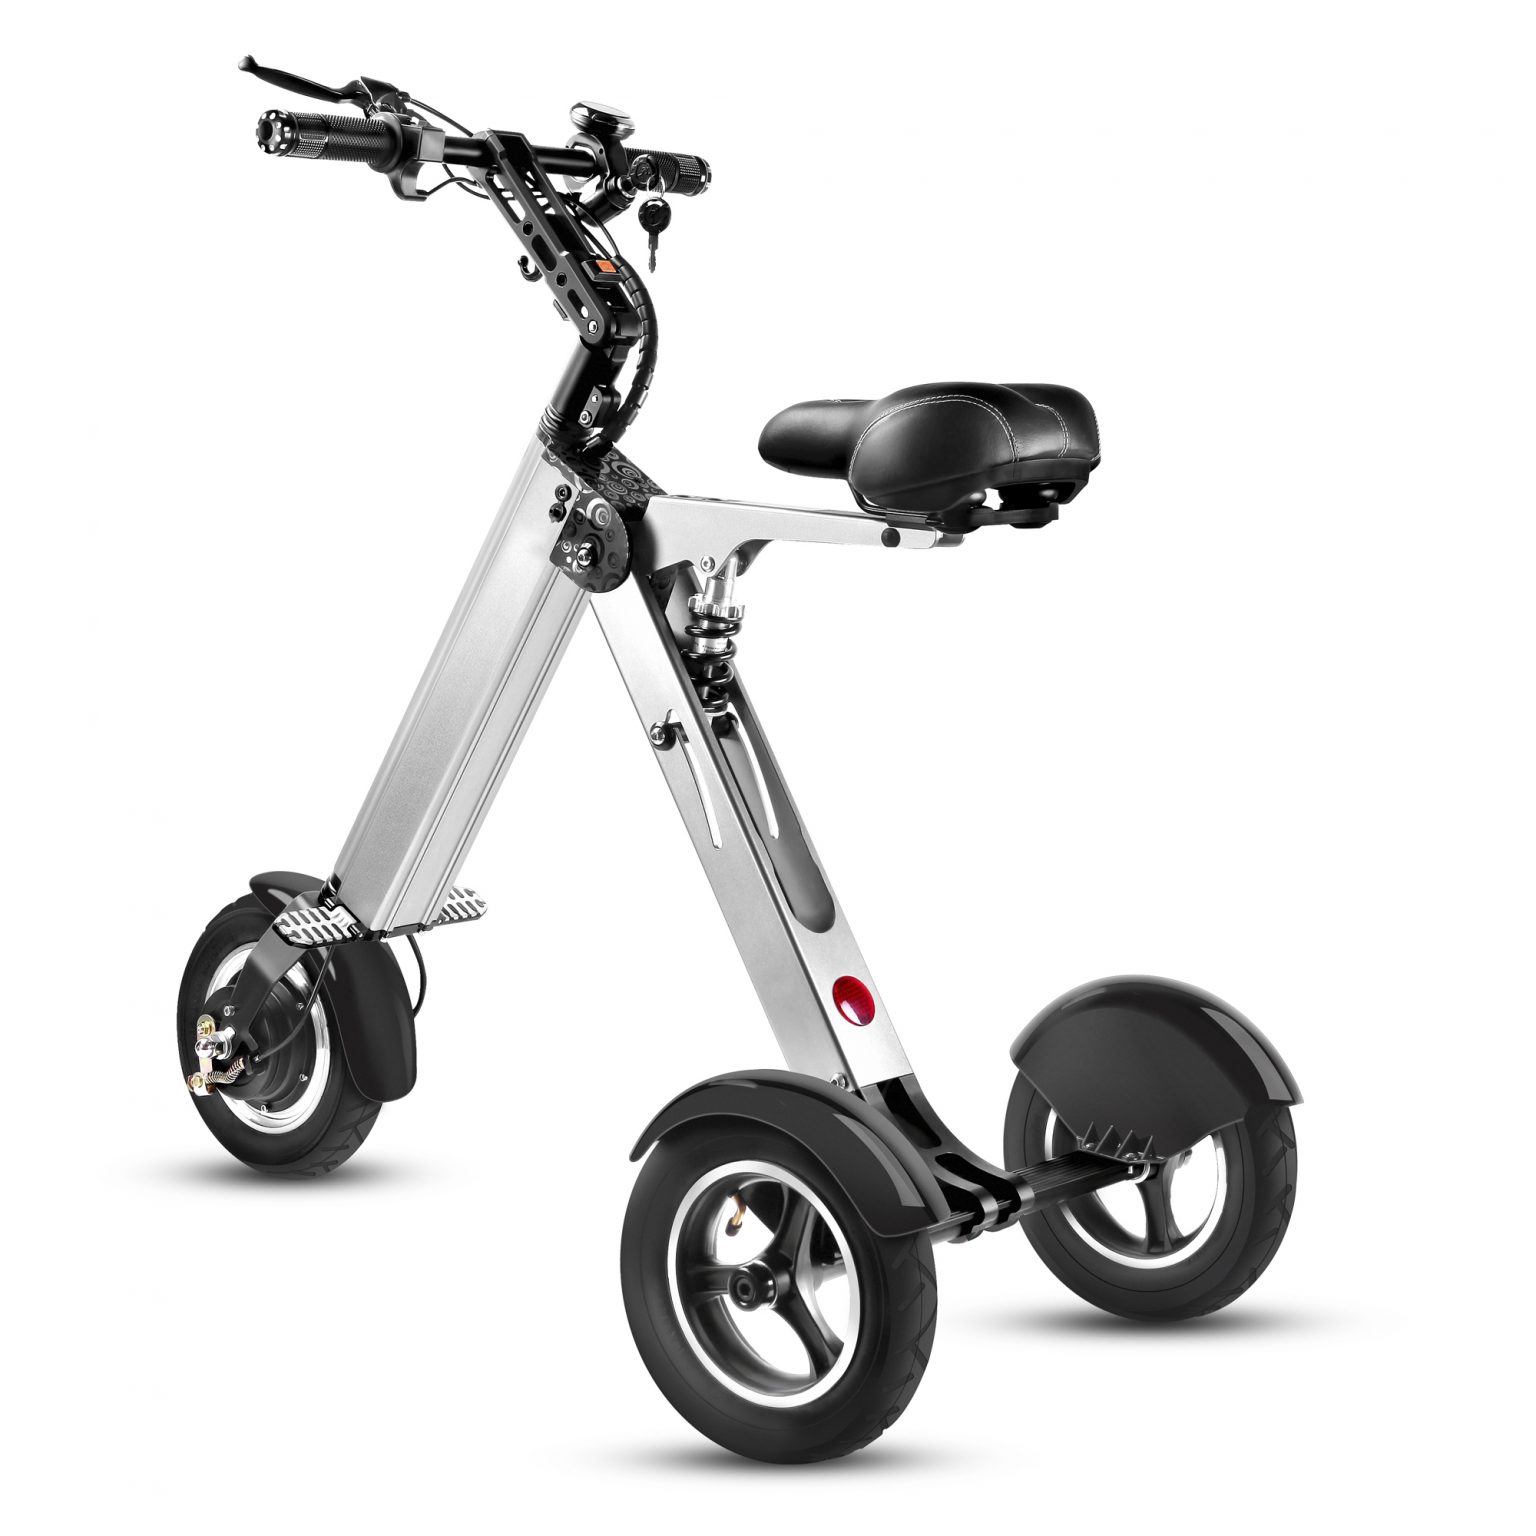 Topmate Es32 Electric Scooter Mini Tricycle For Adult Folding Electric Mobility Scooter With 10 8060